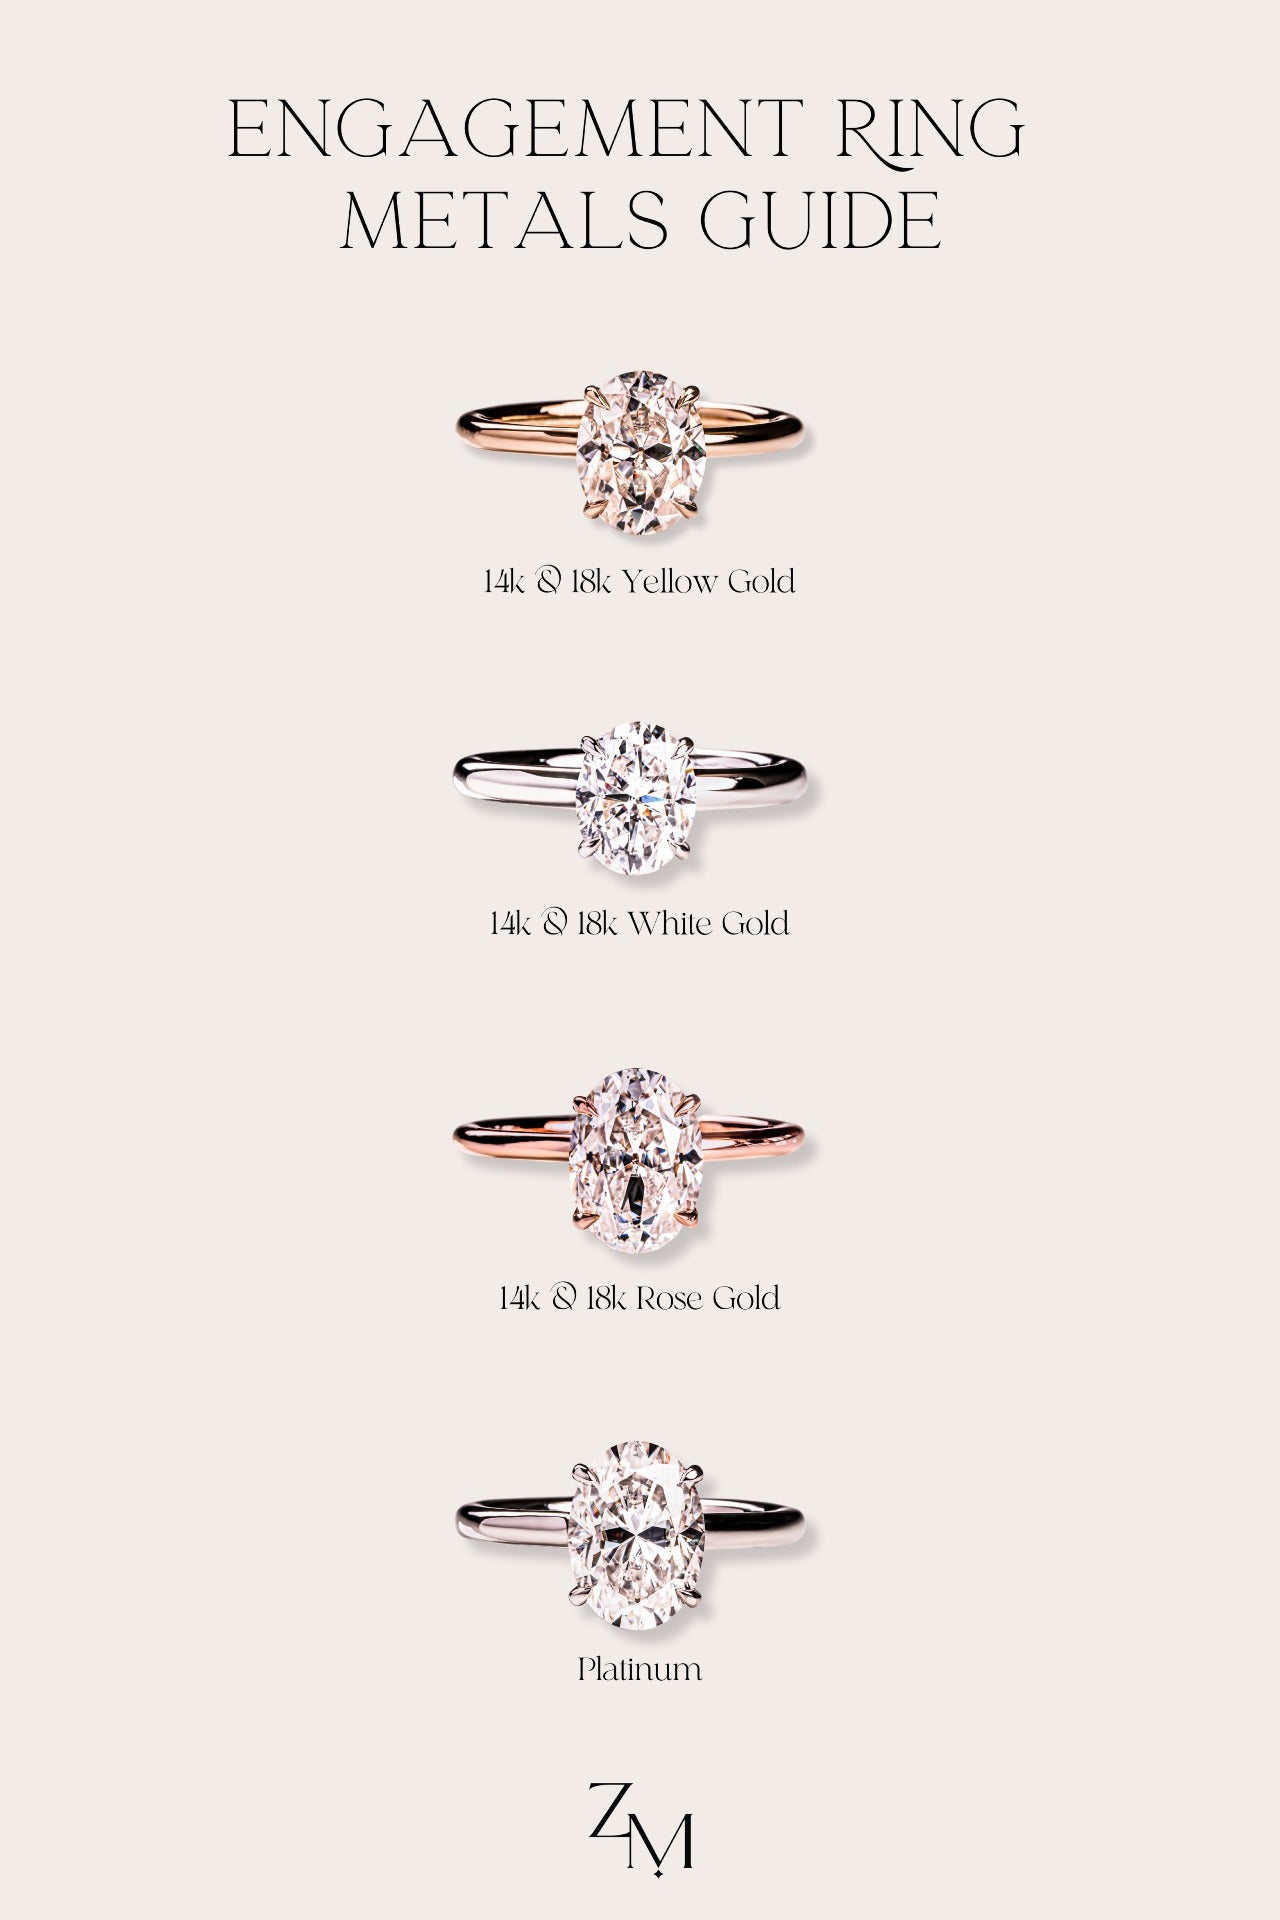 Engagement ring metals guide